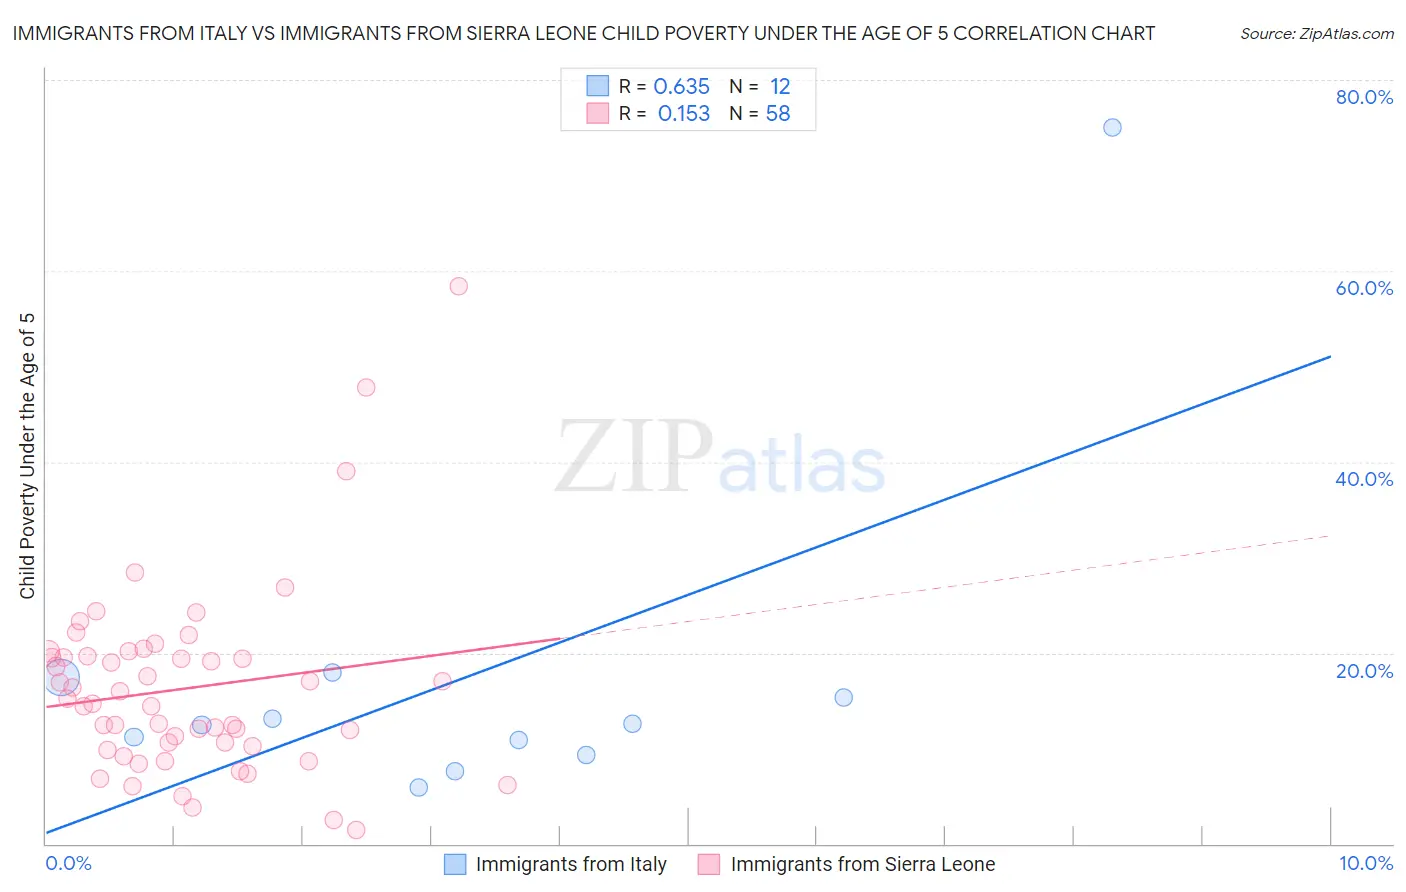 Immigrants from Italy vs Immigrants from Sierra Leone Child Poverty Under the Age of 5